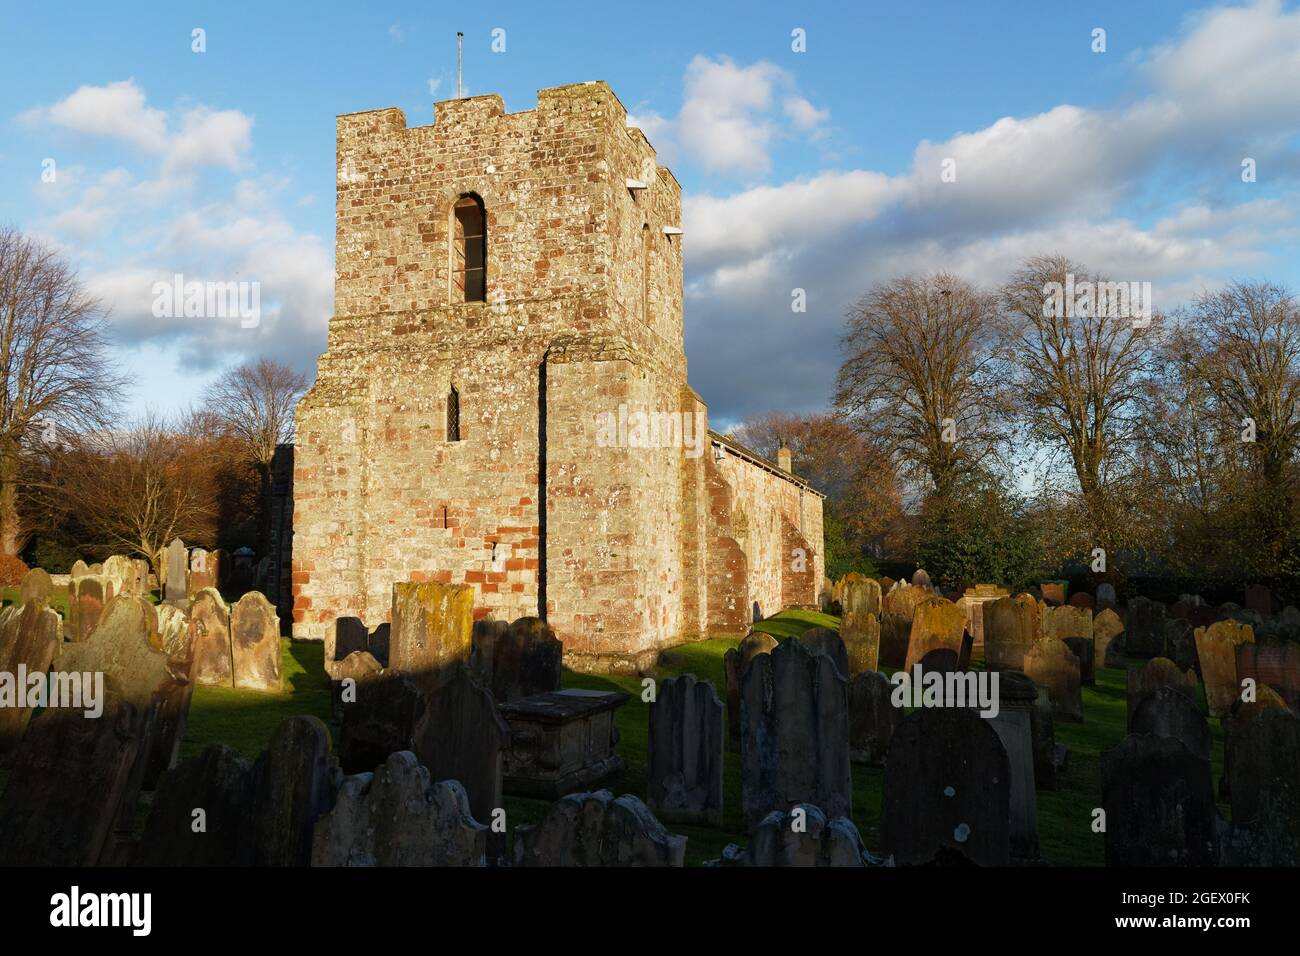 12th century St Michael's Church in Burgh by Sands near the Cumbrian shores of the Solway Firth Stock Photo